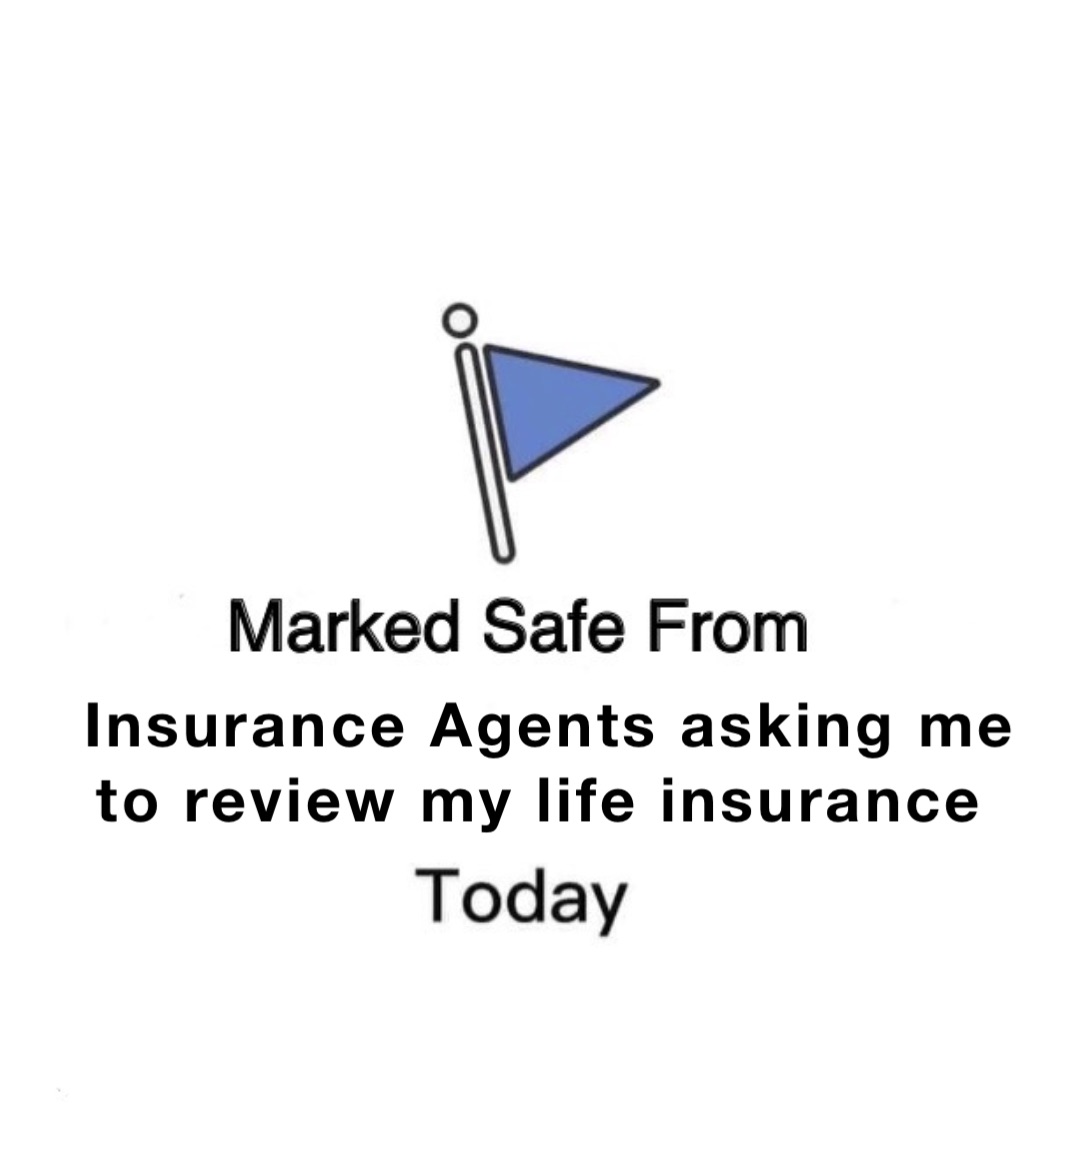 Insurance Agents asking me to review my life insurance